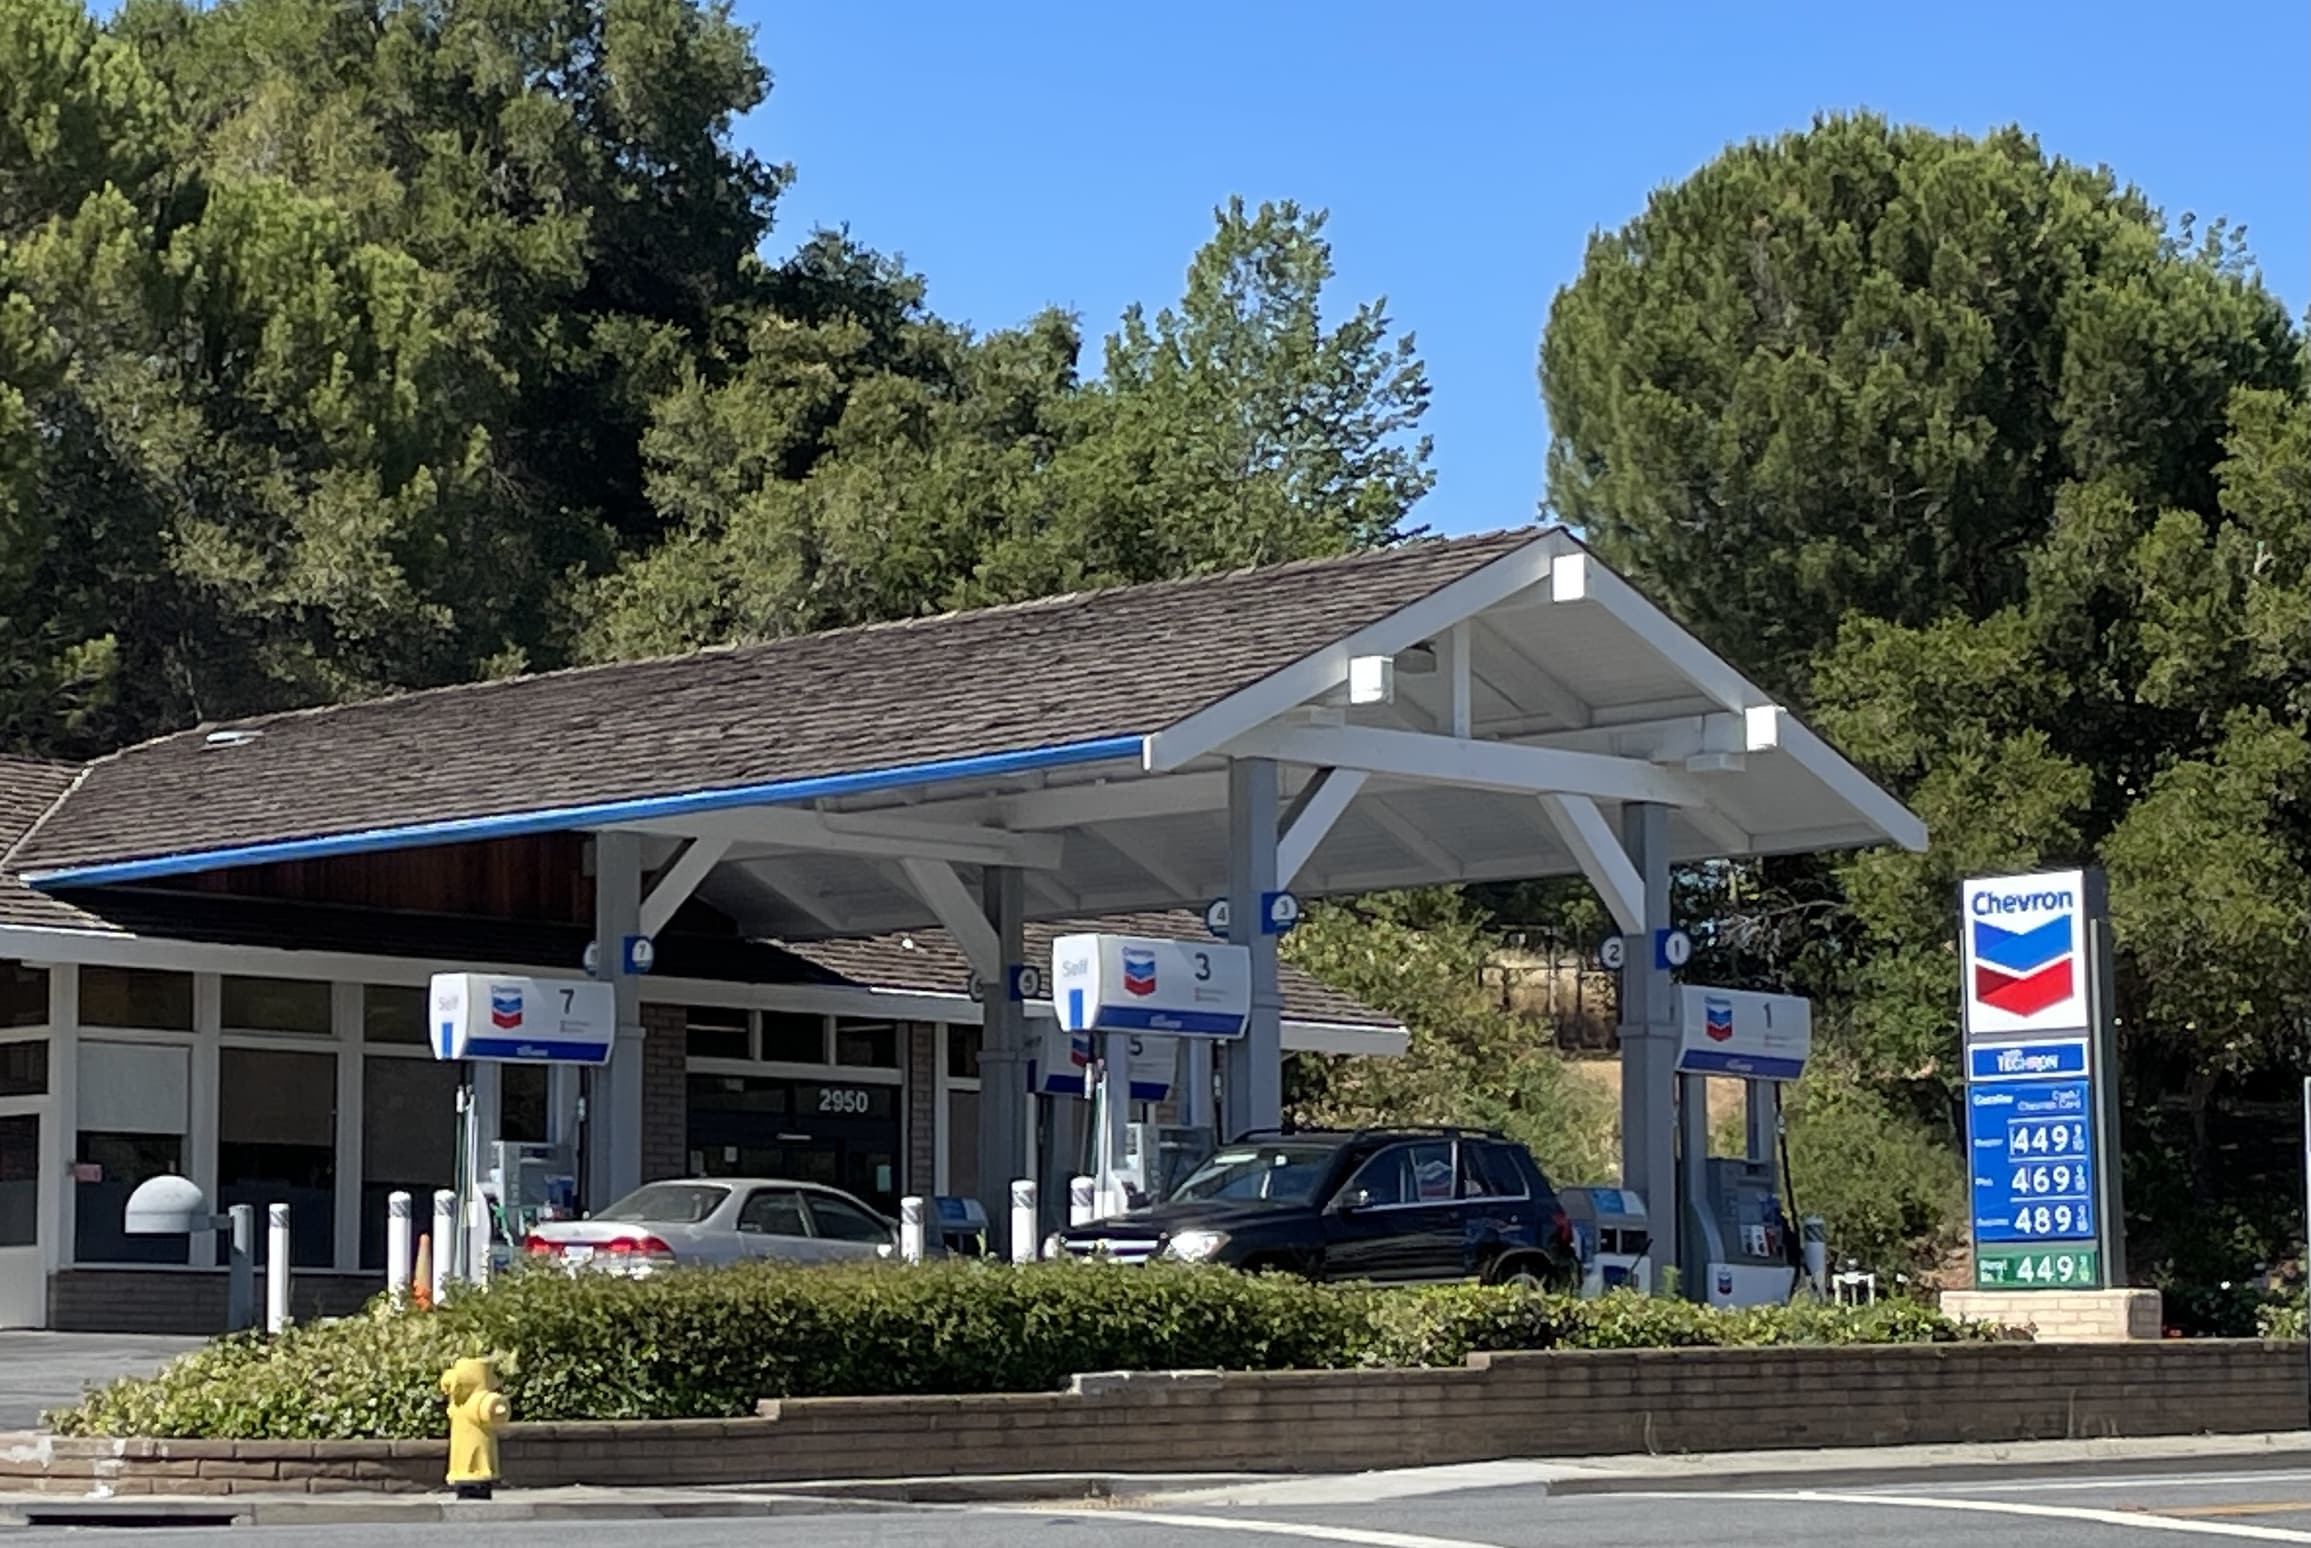 save on gas. picture of a gas station with trees and blue sky in background.